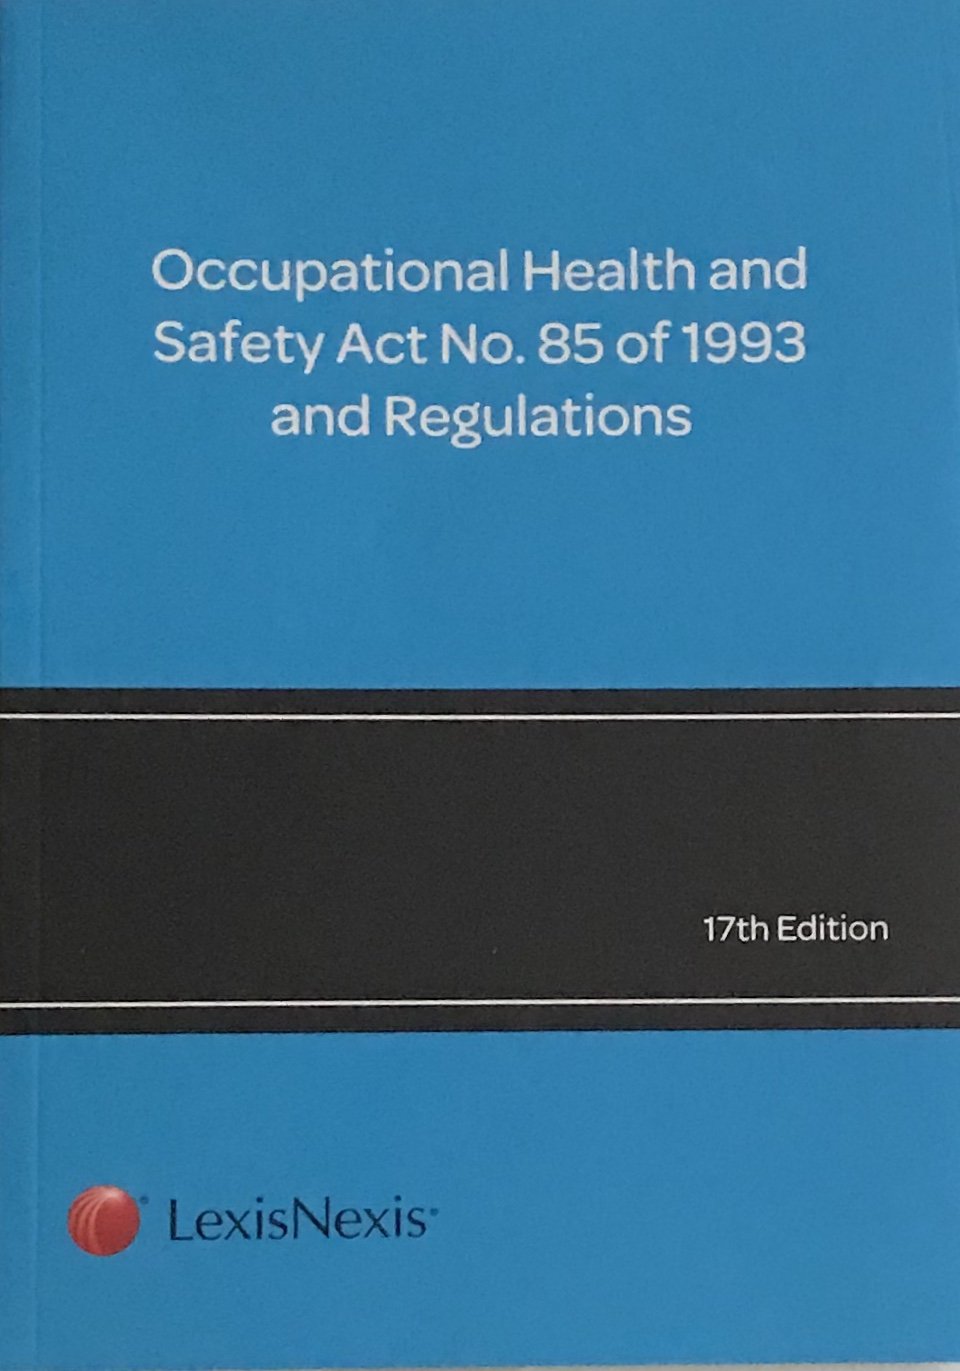 The Occupational Health and Safety Act 85 of 1993